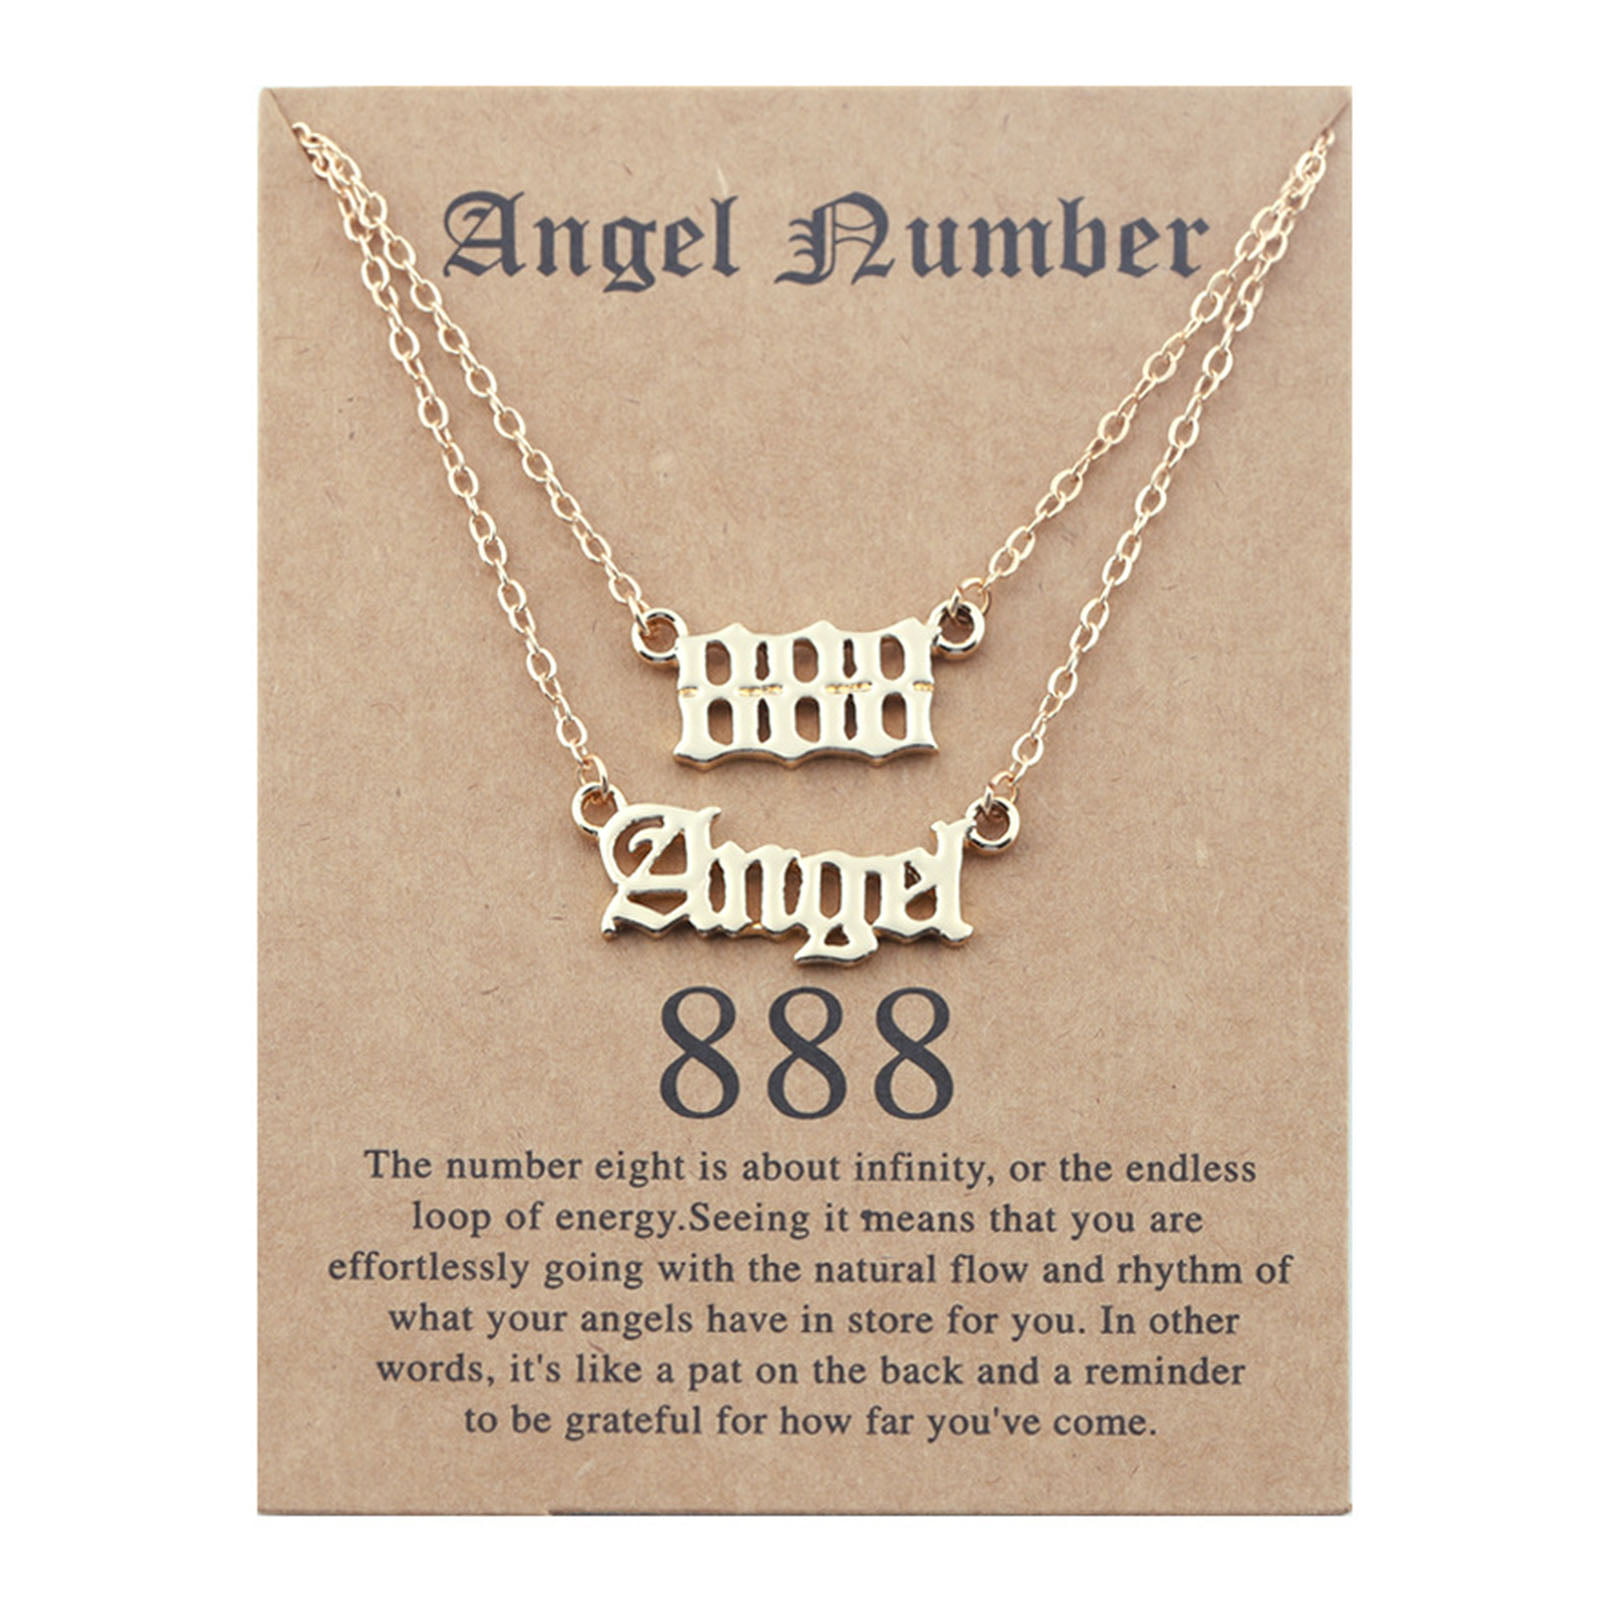 Angel Number Necklace - Silver